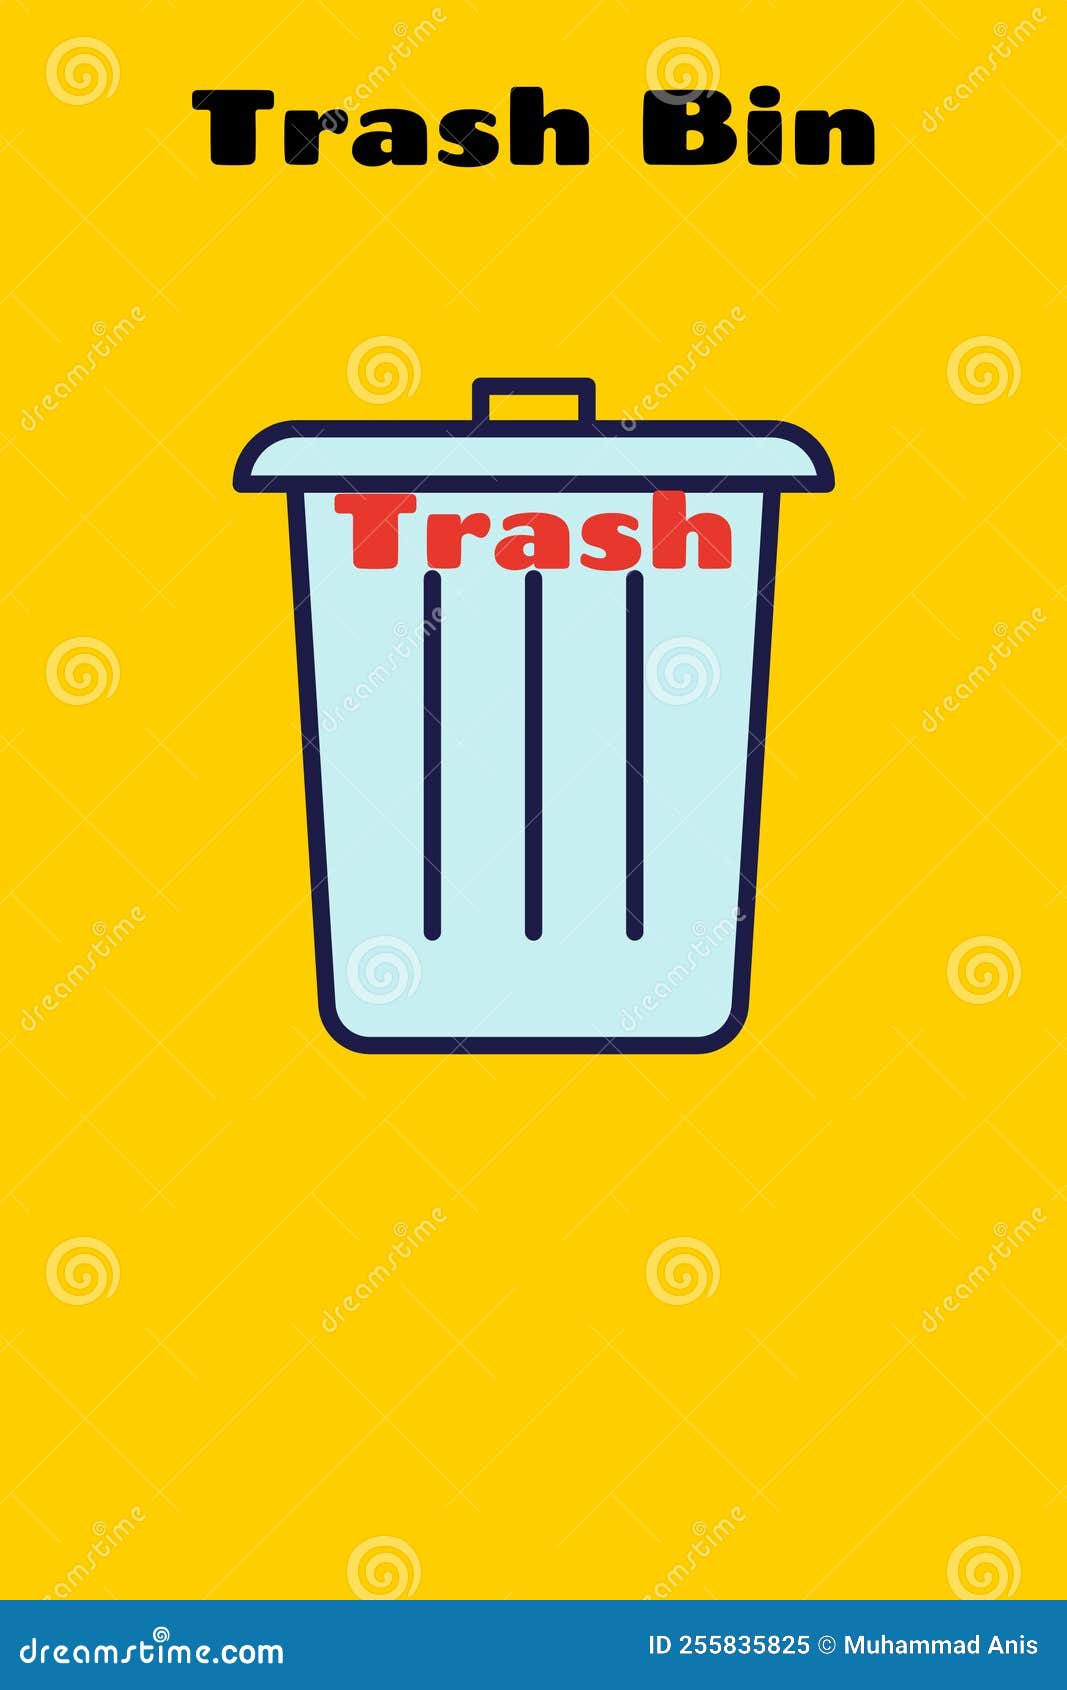 trash bin on the yellow background with its lid closed. trash icon for junks